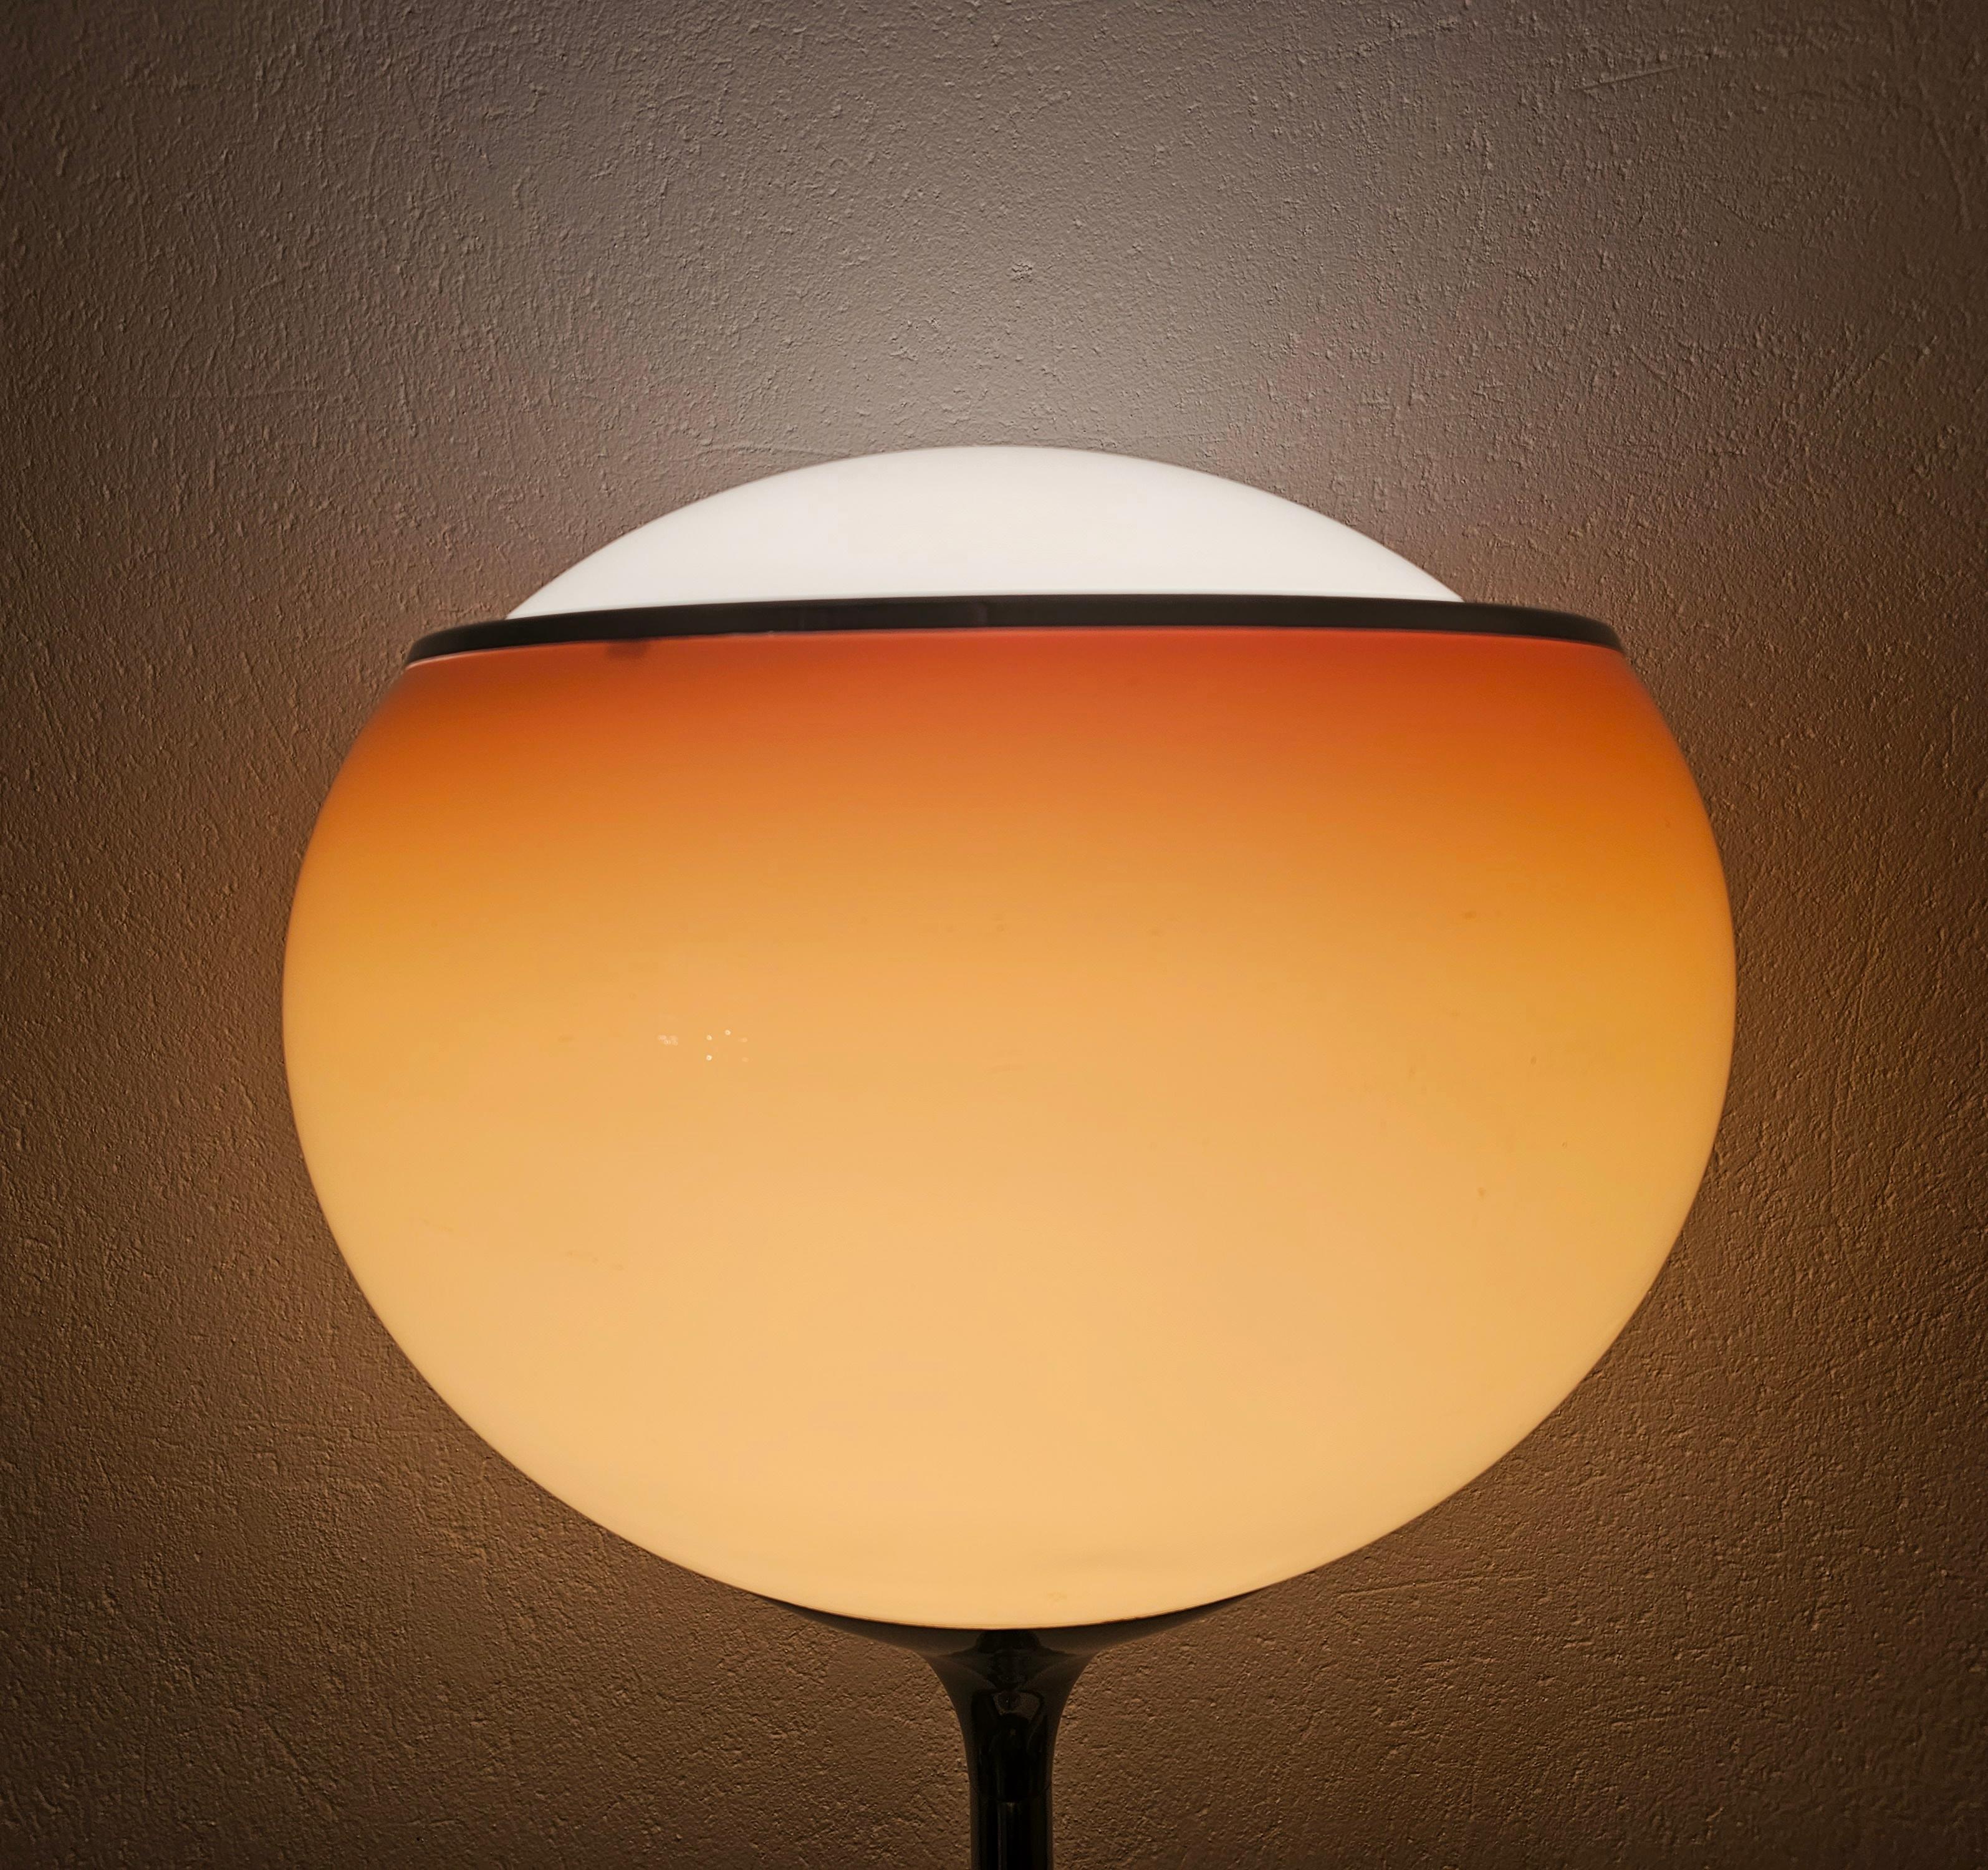 In this listing you will find a Harvey Guzzini 'Flash' or 'Bud Grande' space age floor lamp in cappuccino colour. This iconic lamp creates a beautifully orange-like glow and has an elegant chrome base. The lamp requires one E27 lightbulb and